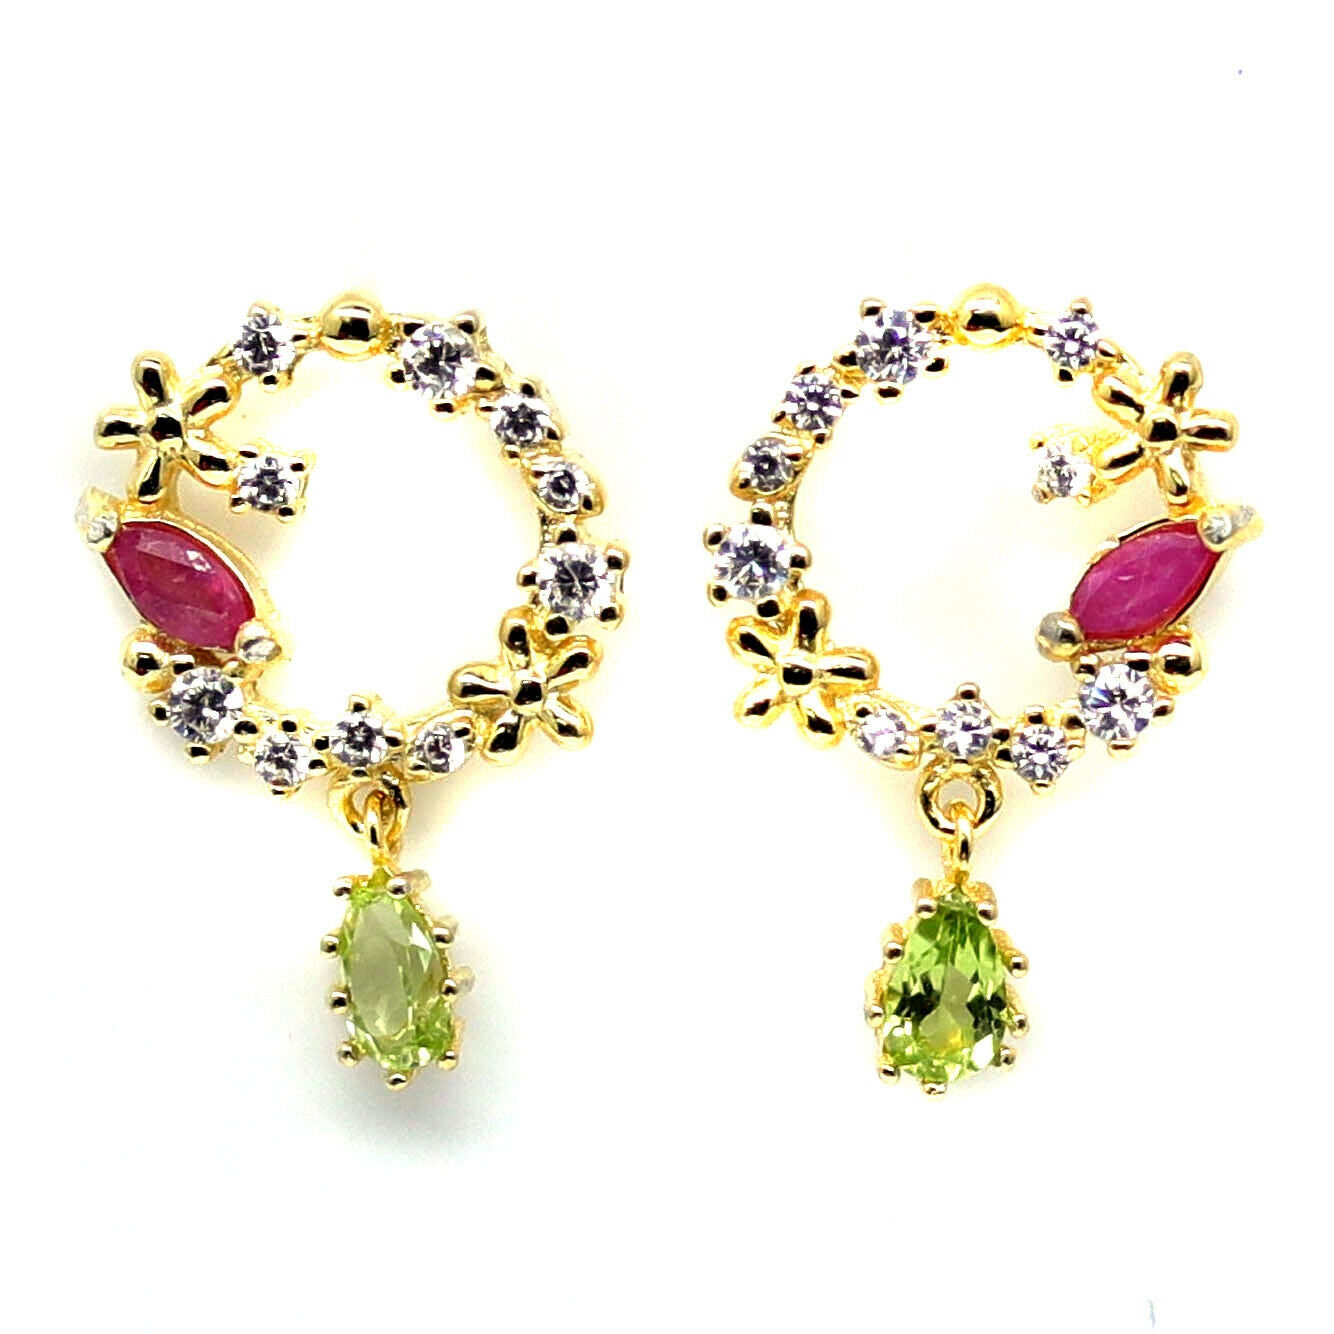 Beautiful Natural Ruby and Peridot Earrings Sterling Silver/Gold Plated